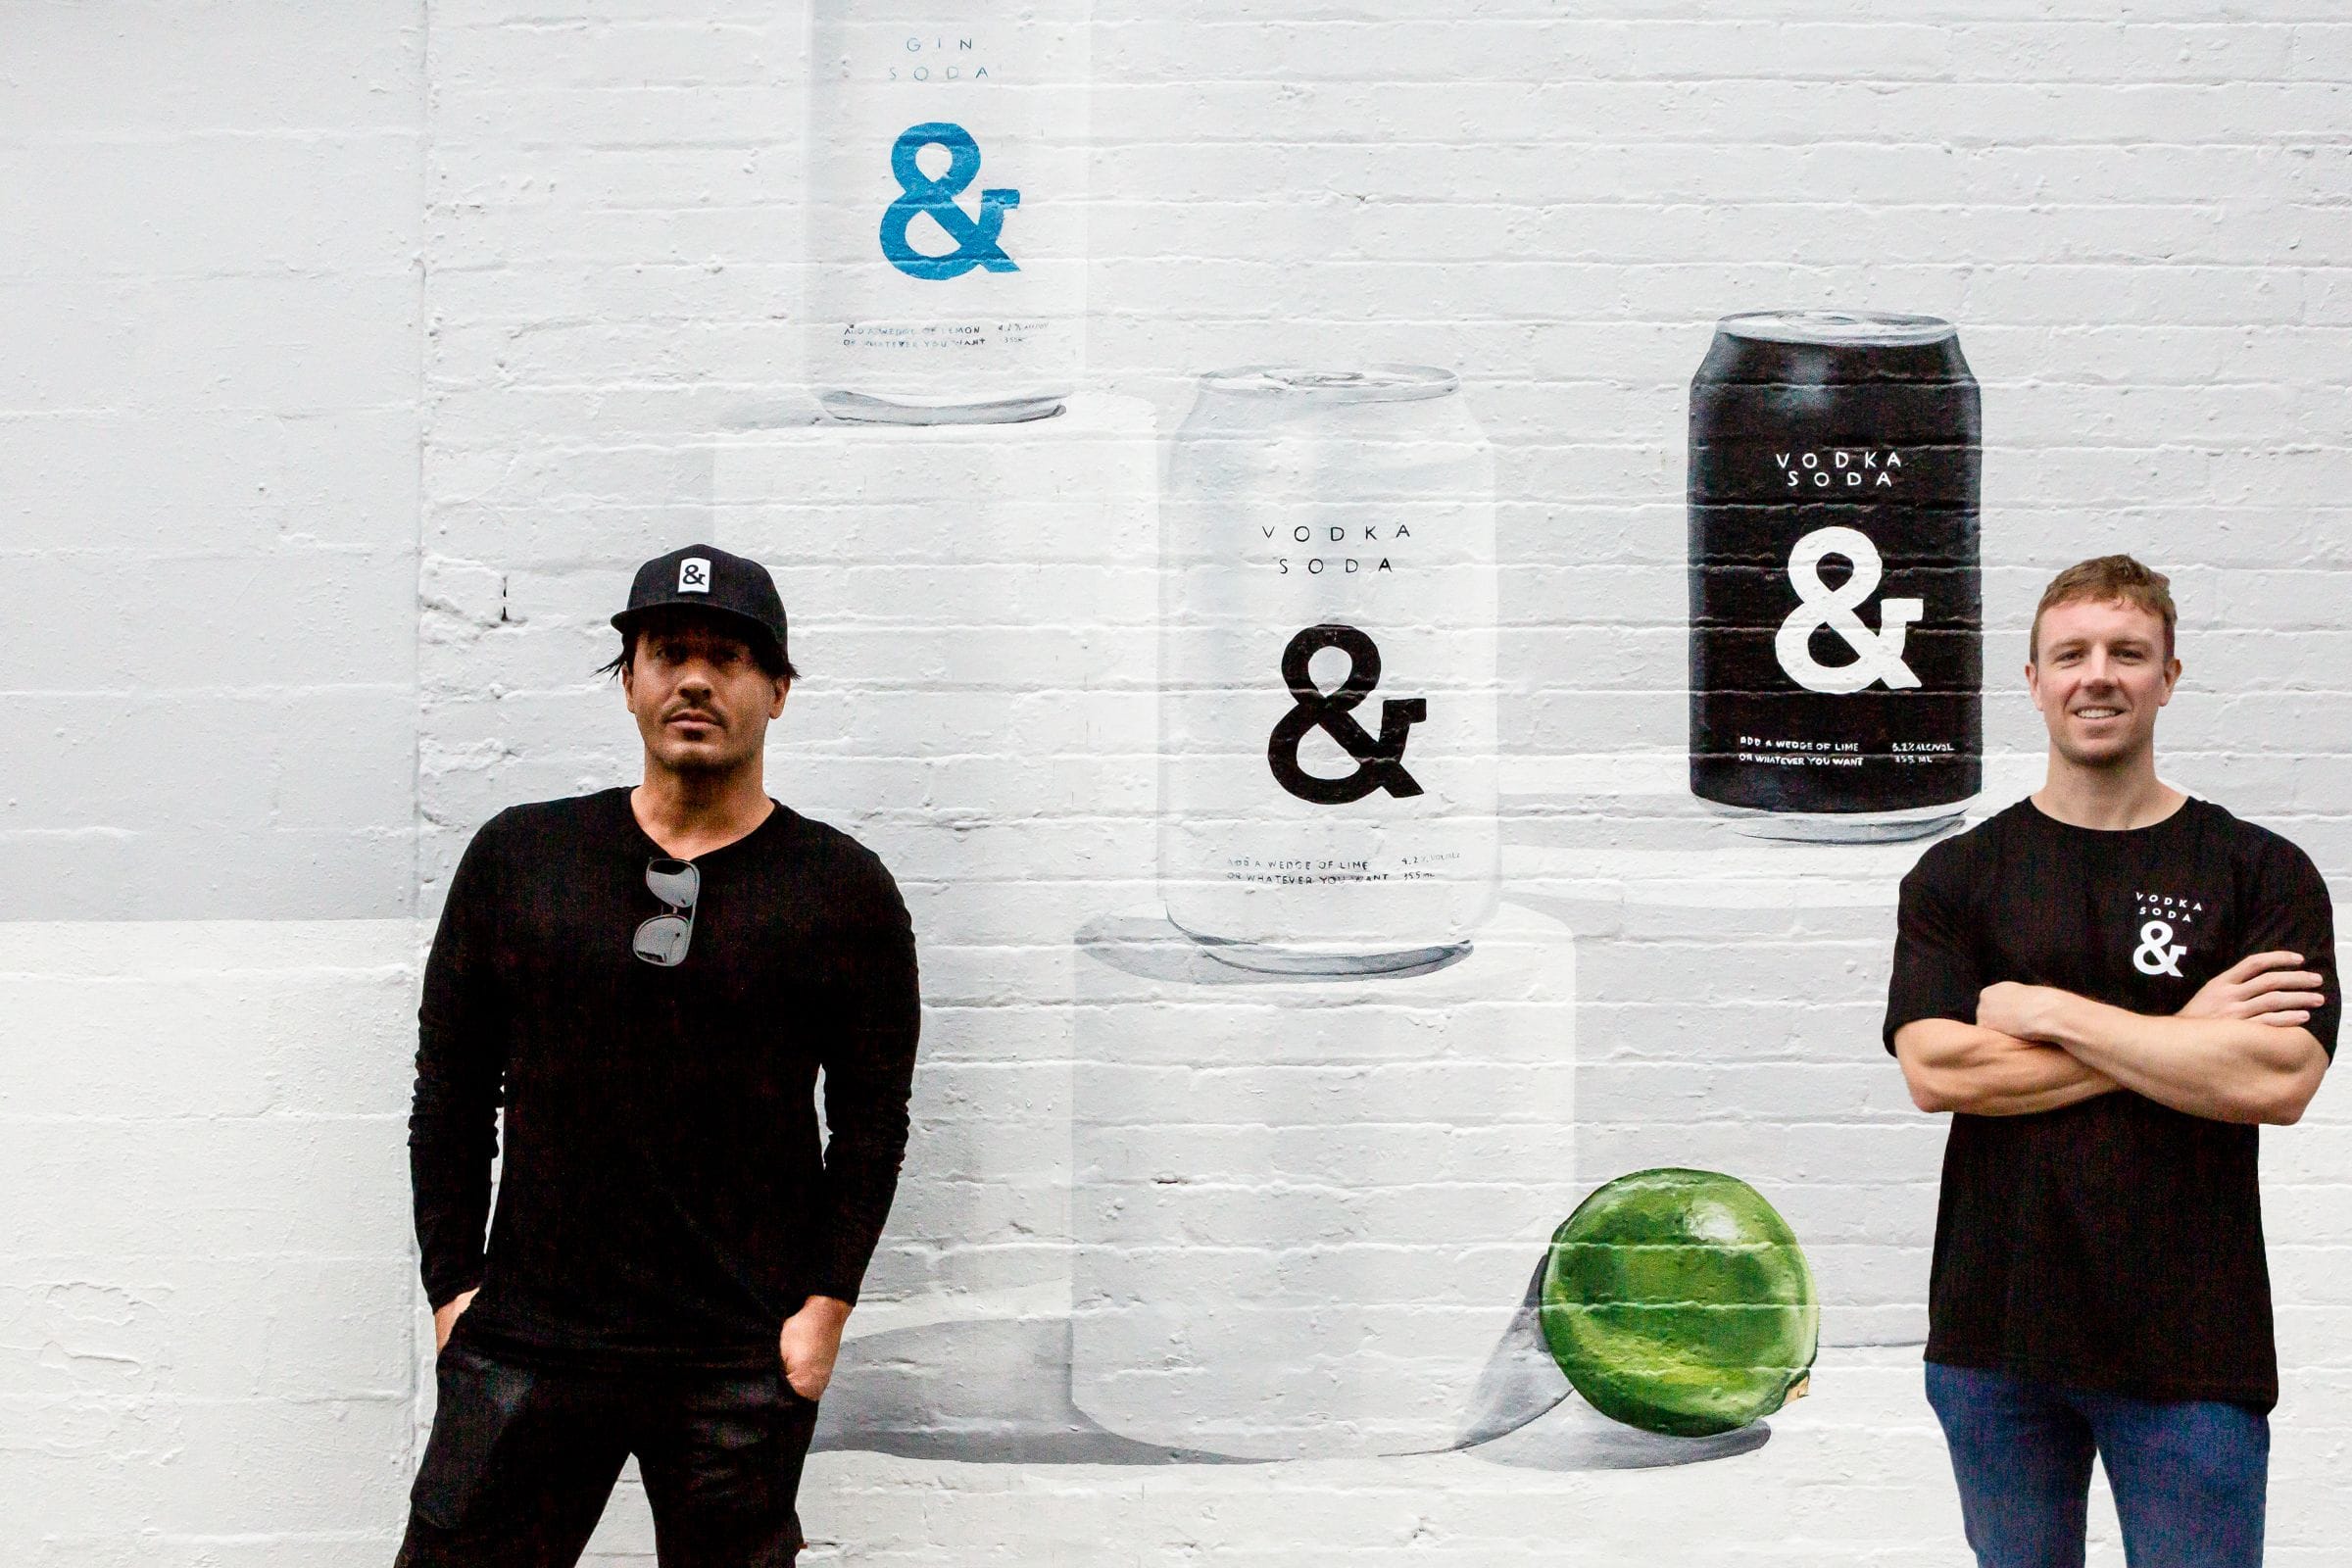 Ampersand Projects co-founders Alex Bottomley and Marcus Kellett